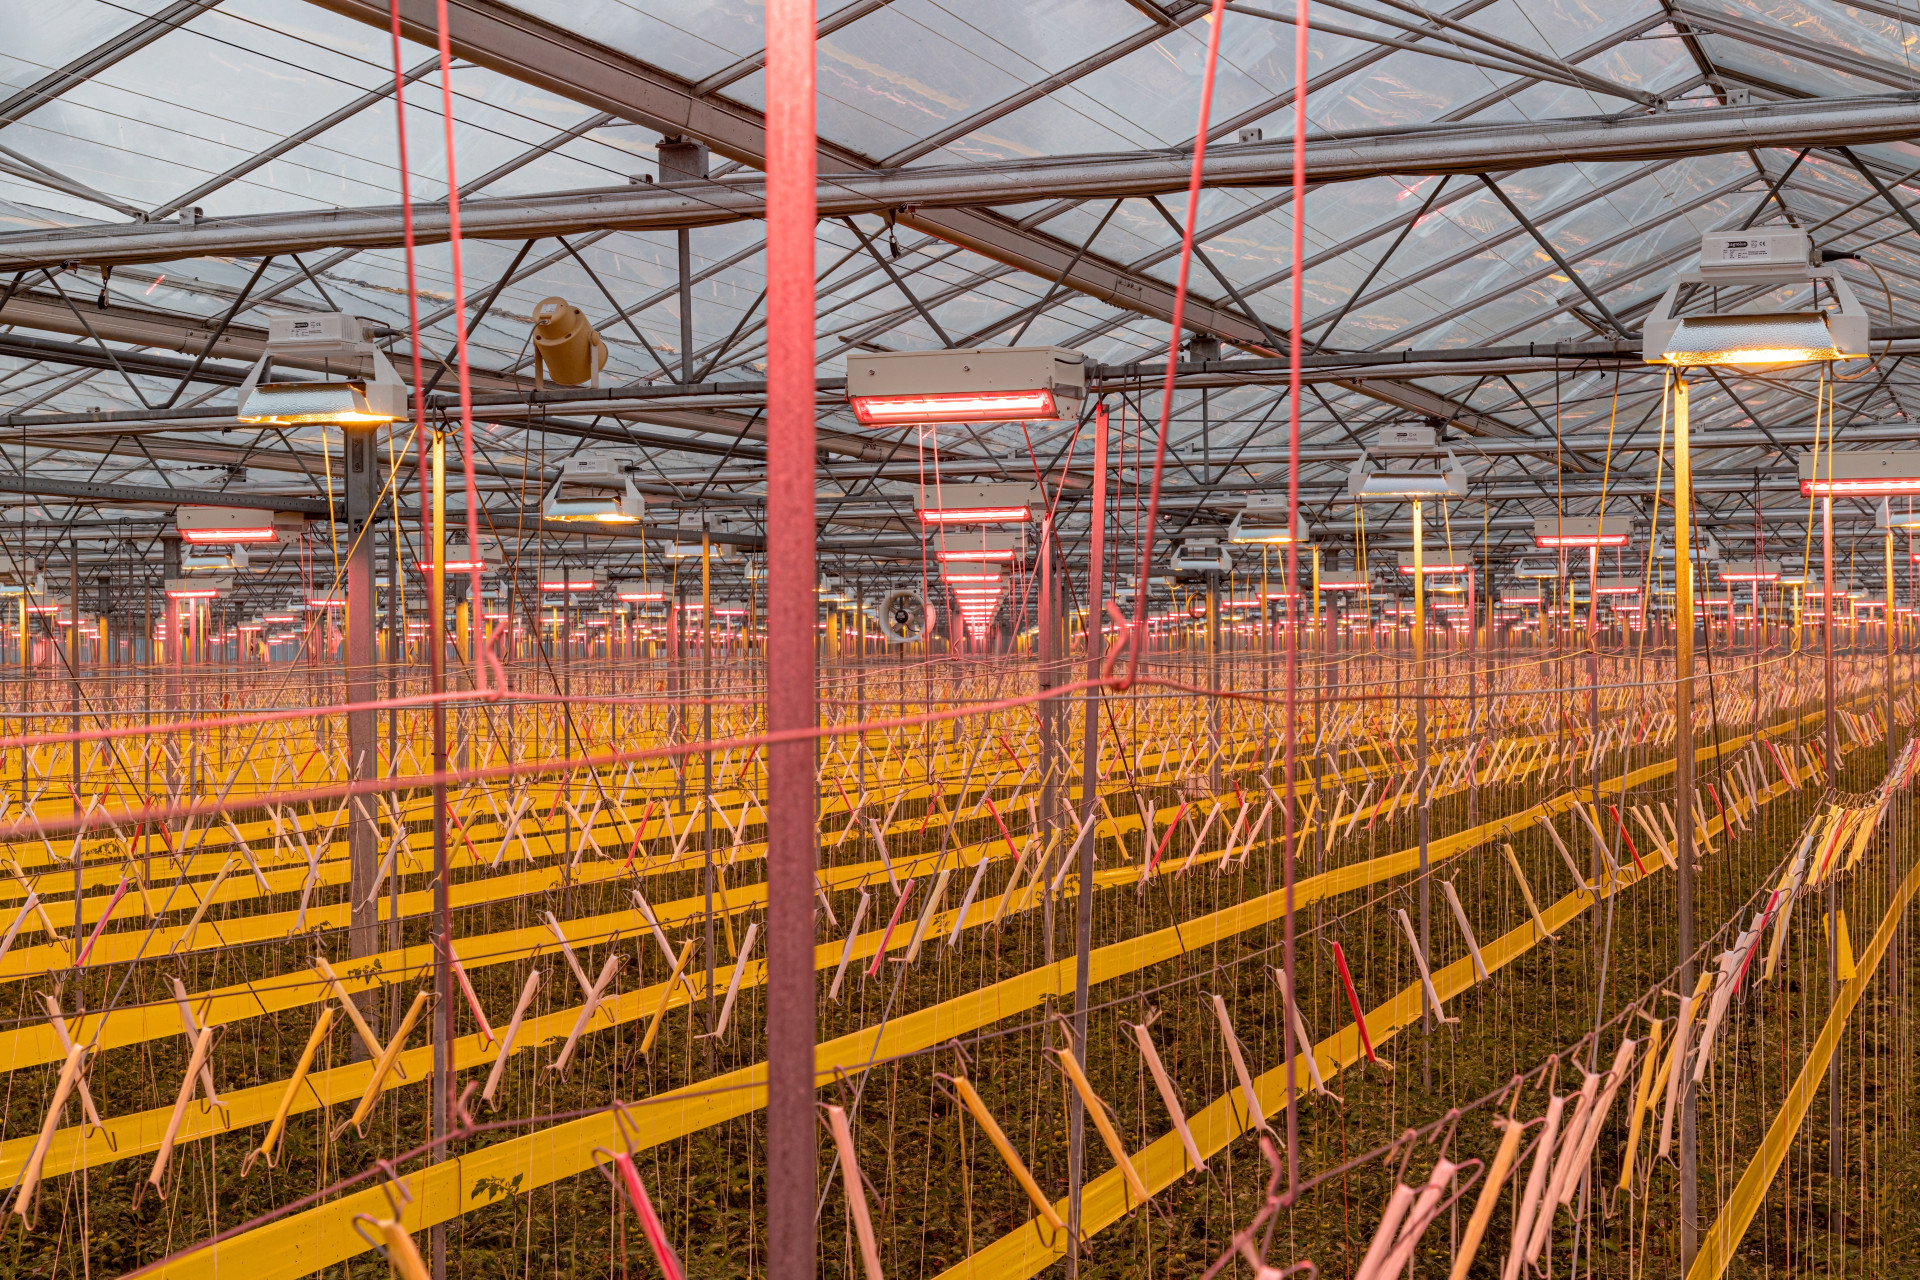 Dutch tomato giant Lans Group reduces energy costs by installing LEDFan toplights on 27 hectares